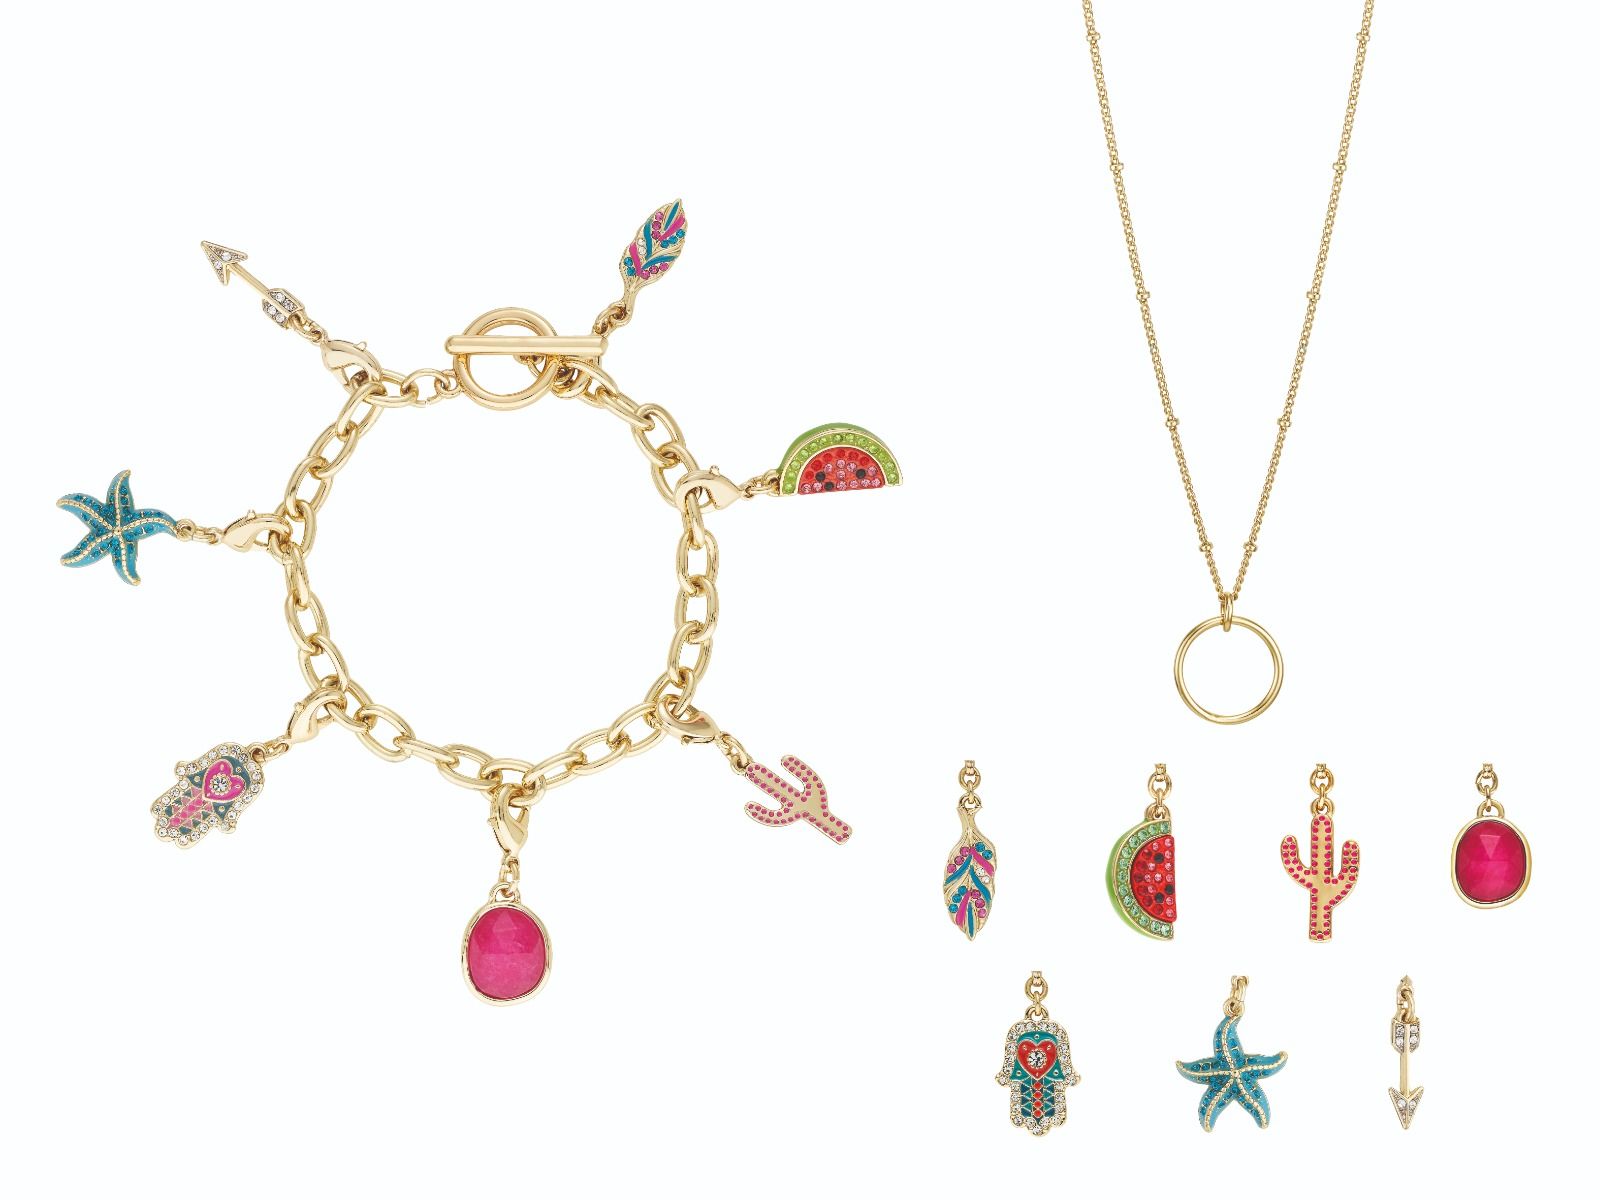 Our beautiful and summery Tropical Charm Bracelet and Pendant set. Packaged in a Buckley London box.